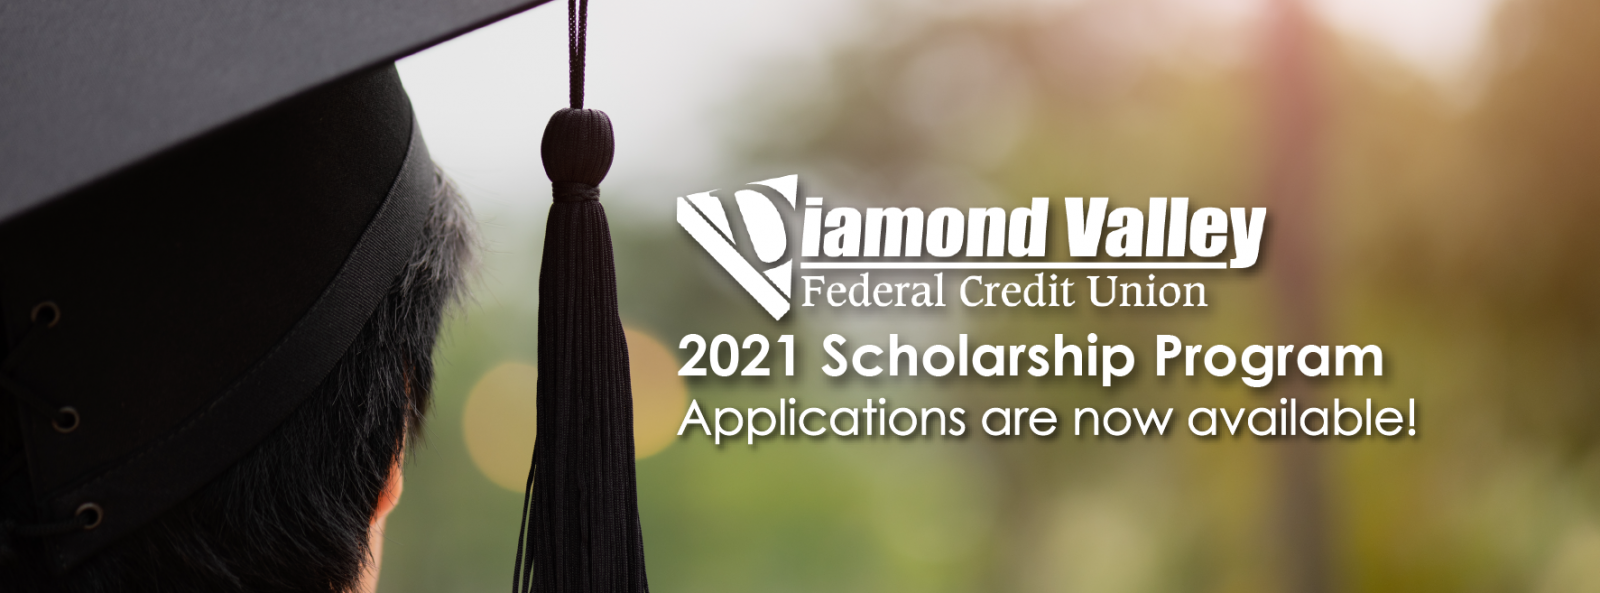 2021 Diamond Valley Federal Credit Union Scholarship - Apply Now!